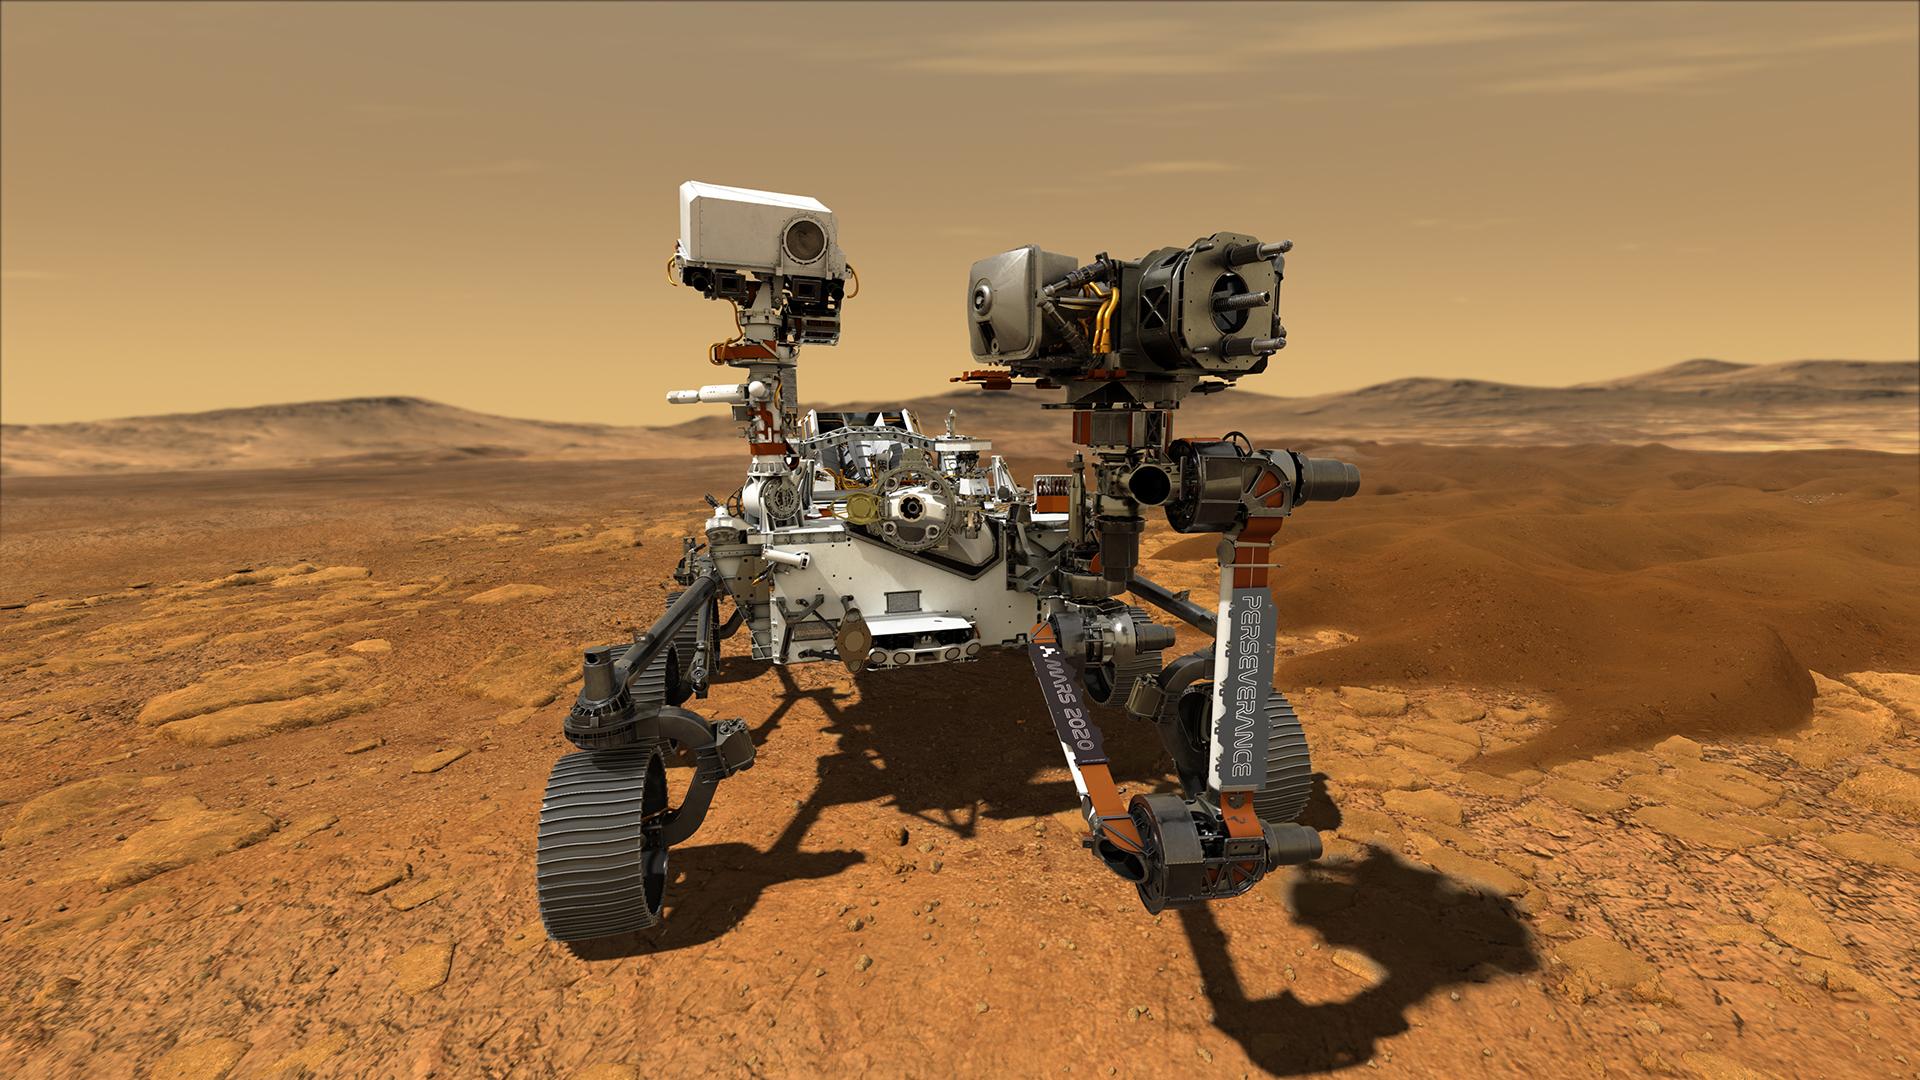 A robotic rover equipped with scientific instruments on the surface of mars.